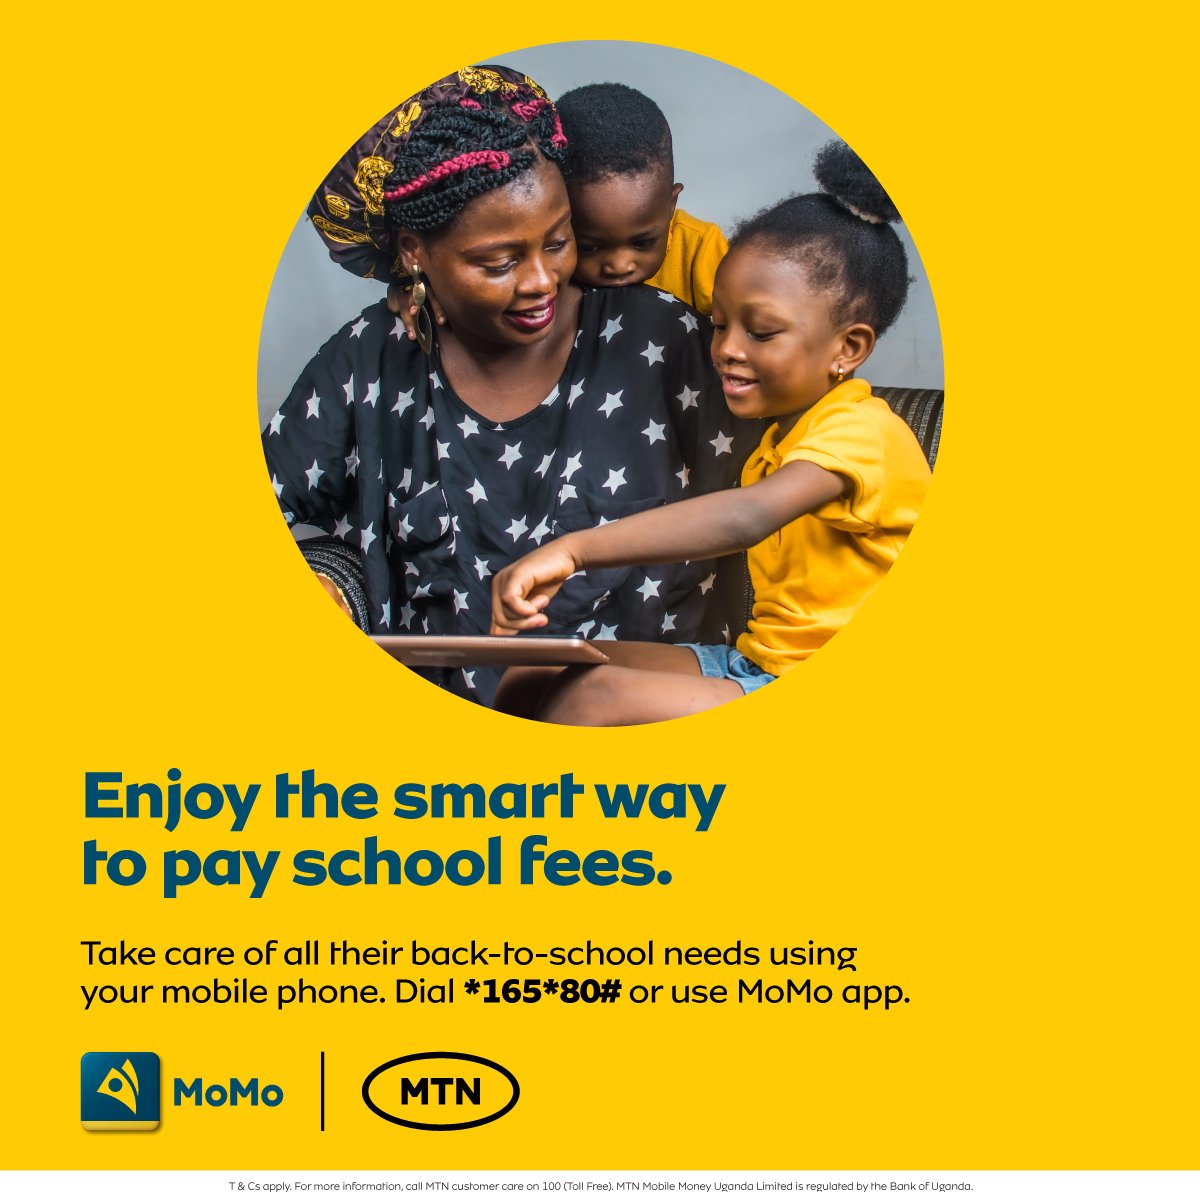 #AD
Simplify the back-to-school season with #MTNMoMo!
Paying school fees is now as easy as dialing *165*80#.
Take care of all your child's educational needs right from your mobile phone.
#BackToSchoolMadeEasy
@mtnug